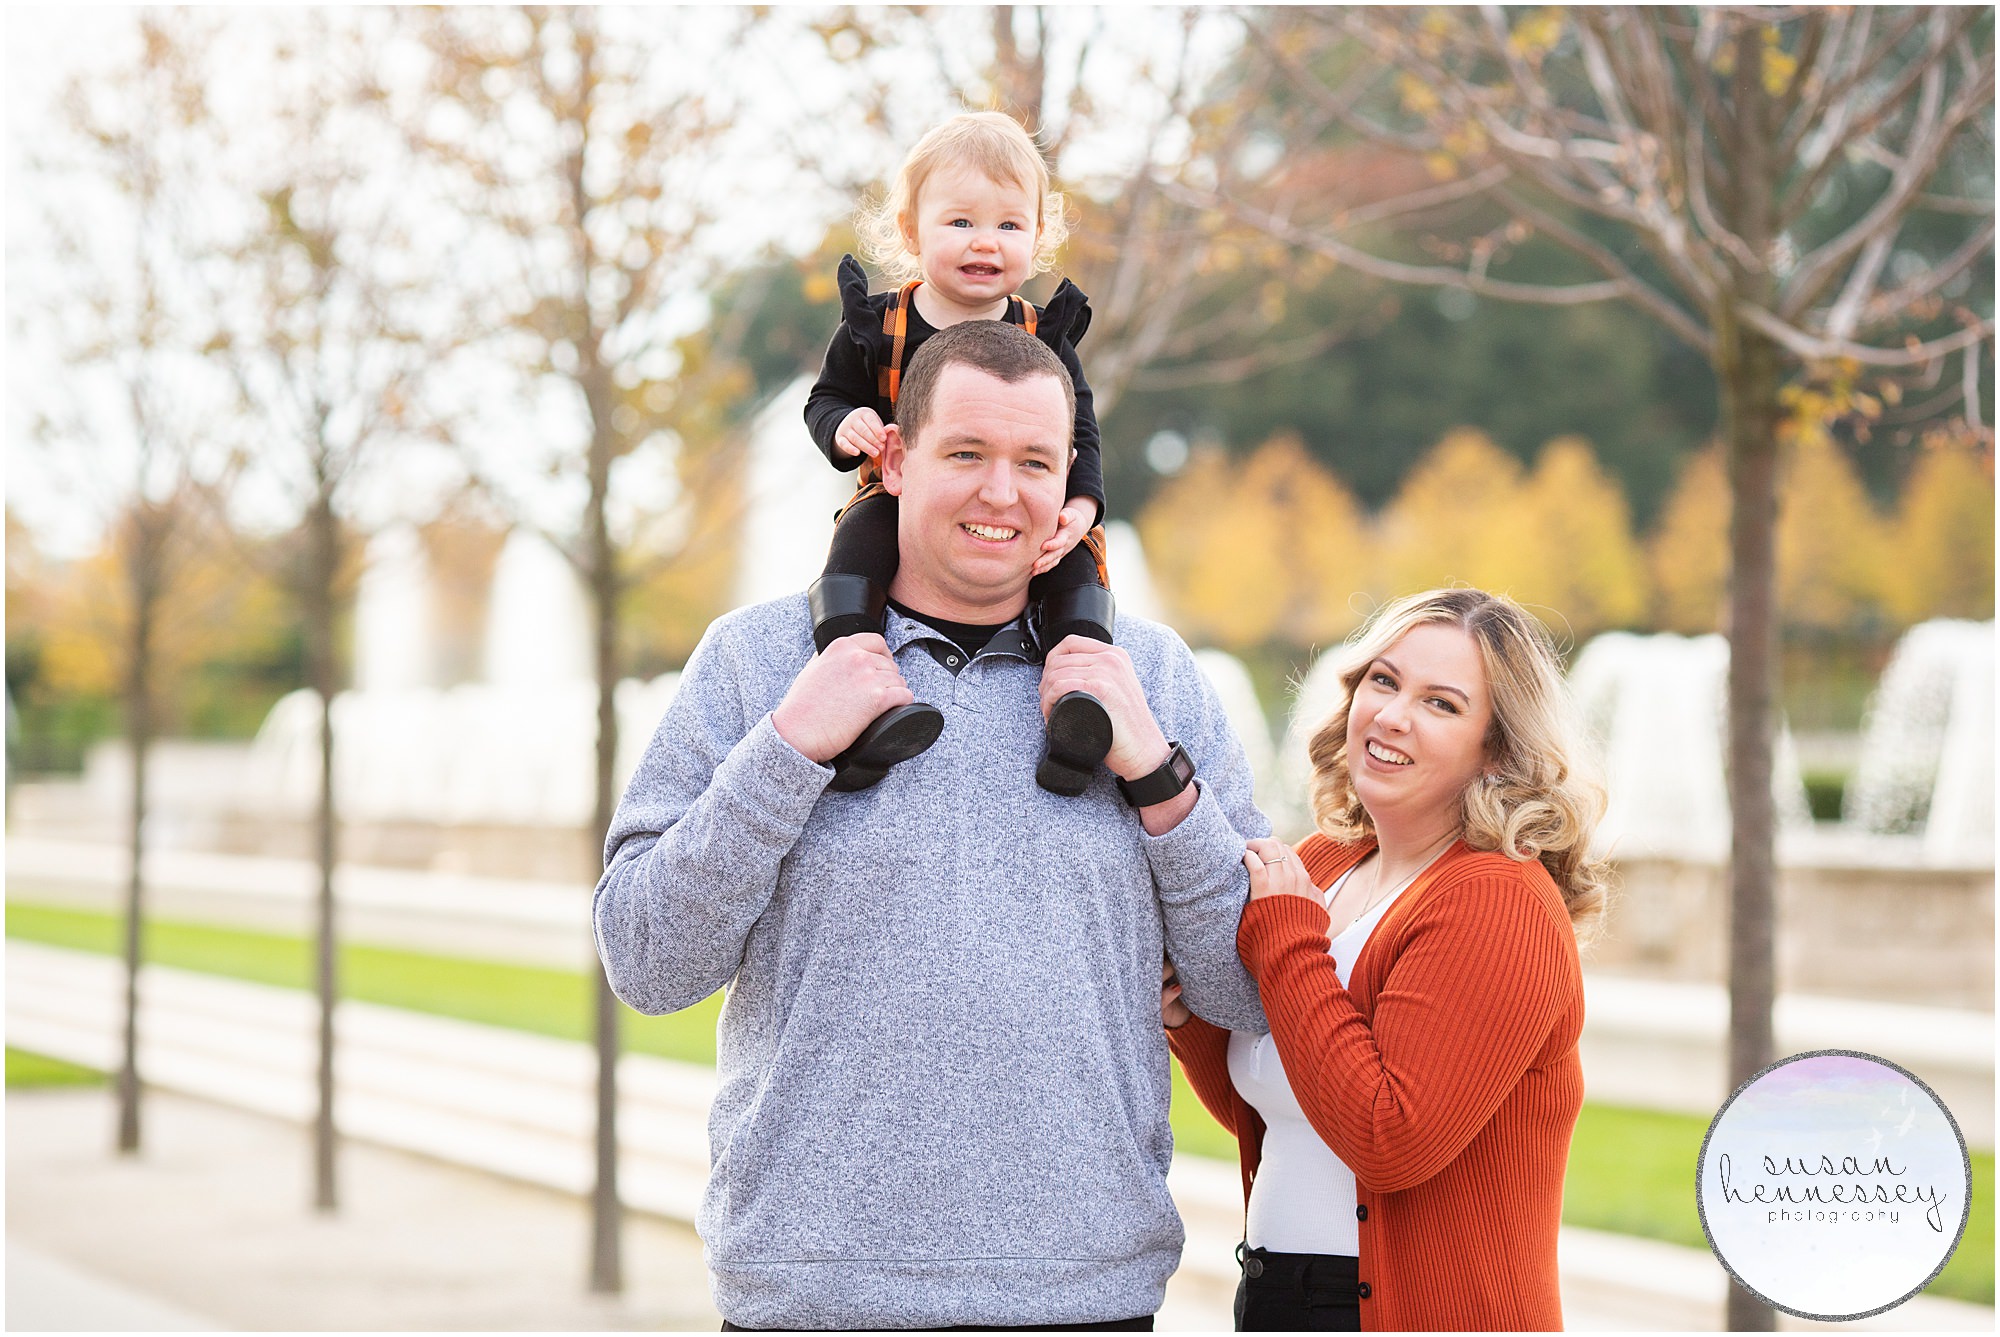 Family session at Longwood Gardens